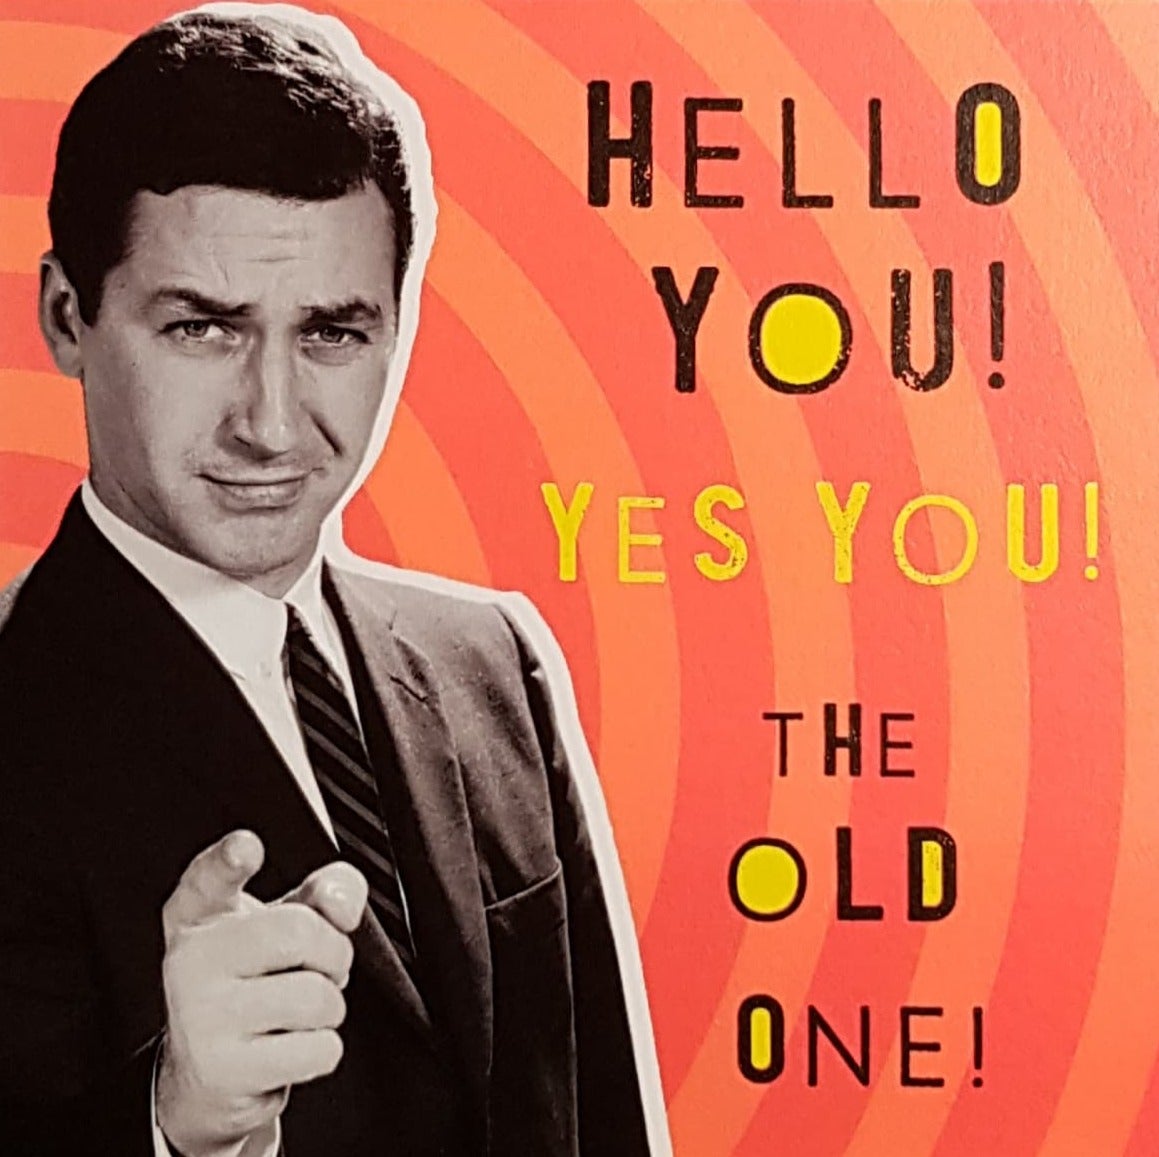 Birthday Card - General Humour / 'Hello You, The Old One!'